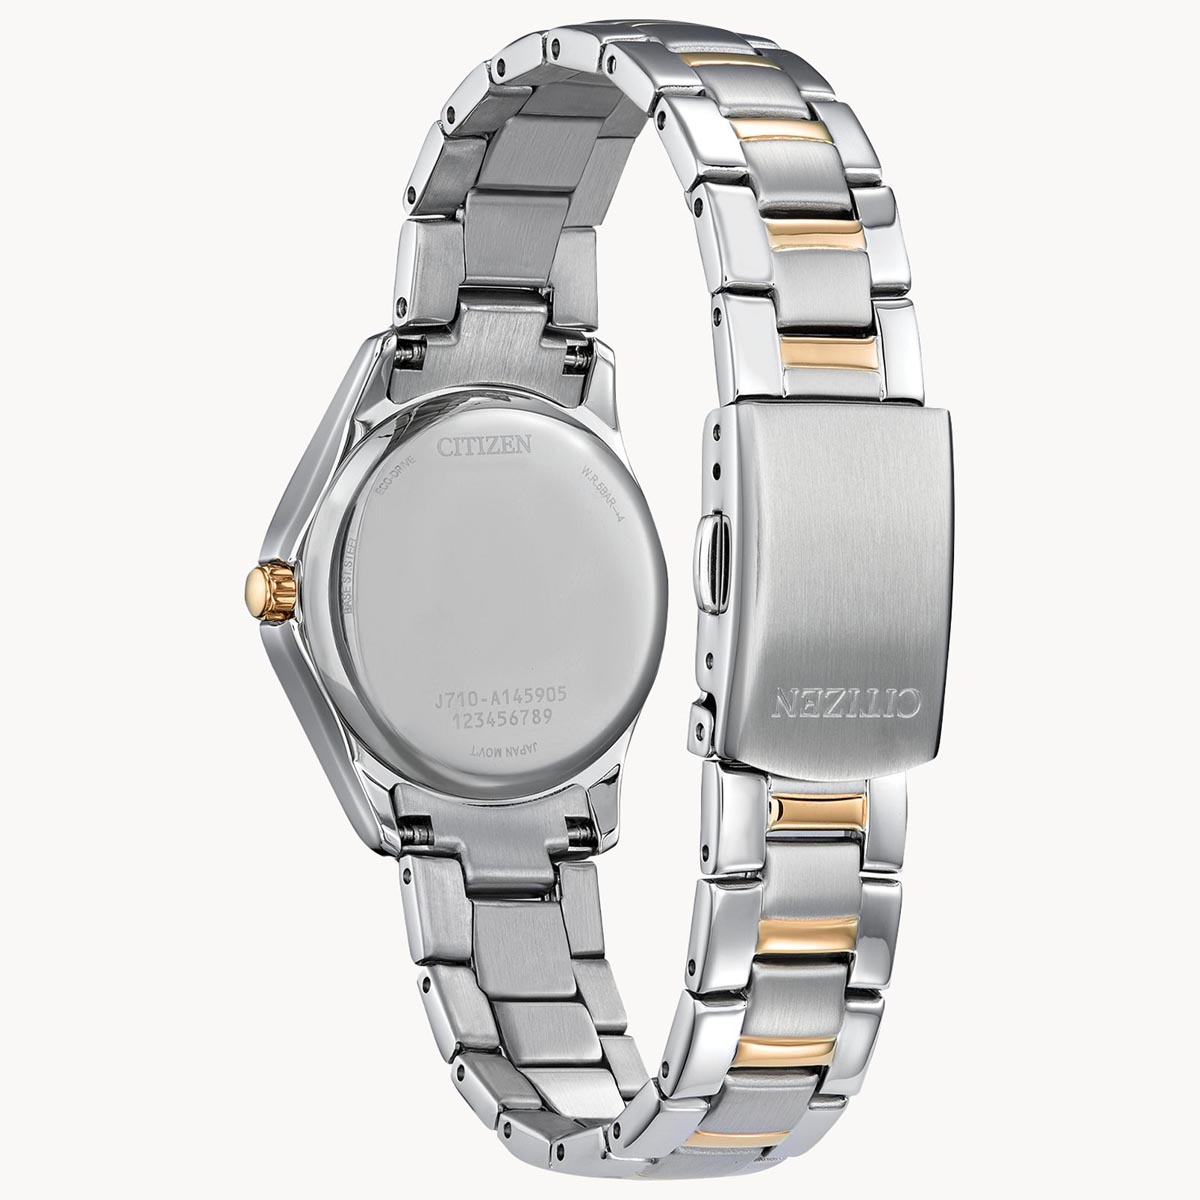 Citizen Crystal Womens Watch with Two Toned Stainless Steel Bracelet and White Dial (eco-drive movement)